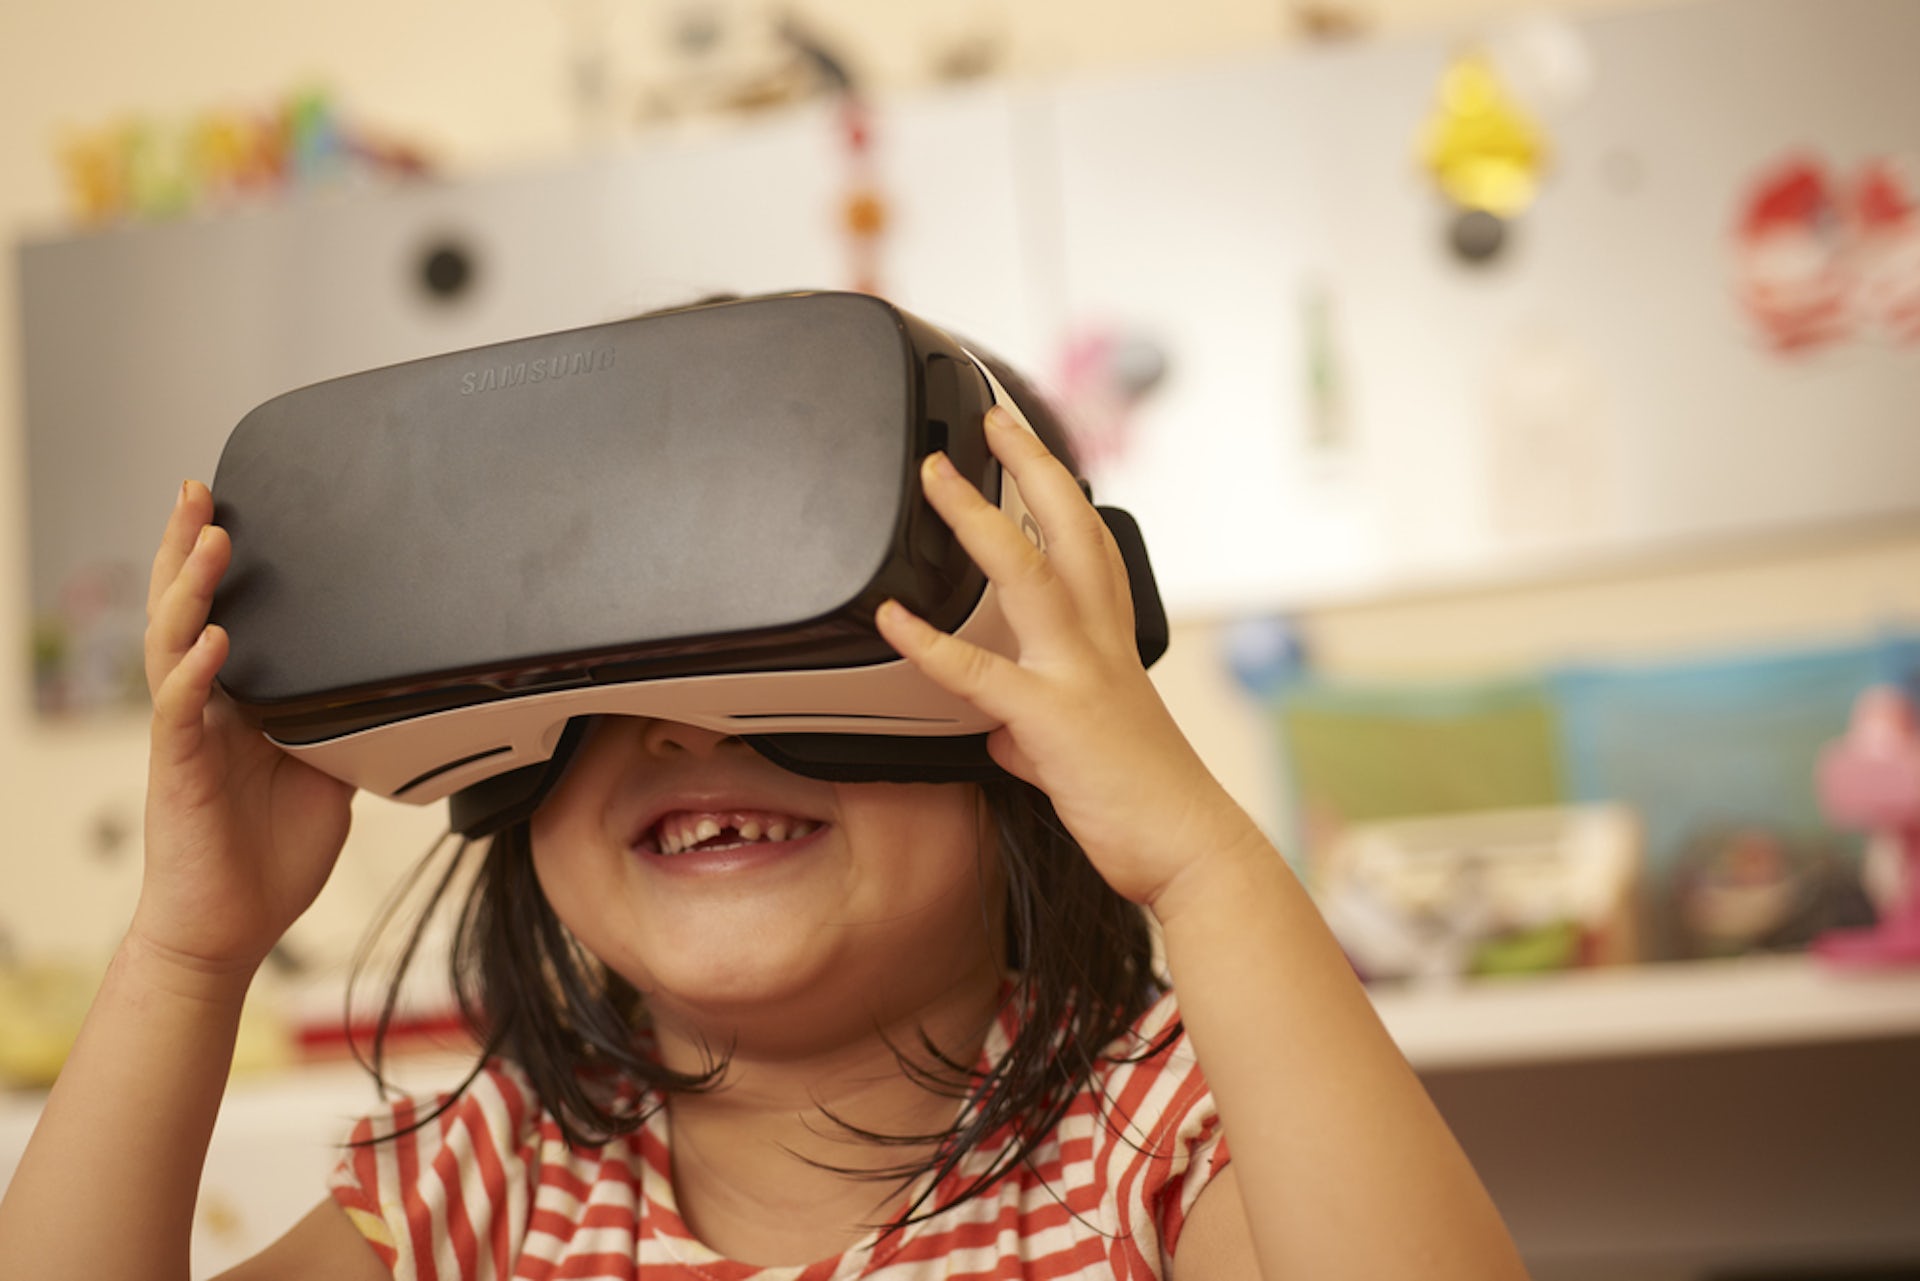 How can parents ensure the safety of their children in the growing threat of virtual reality grooming?